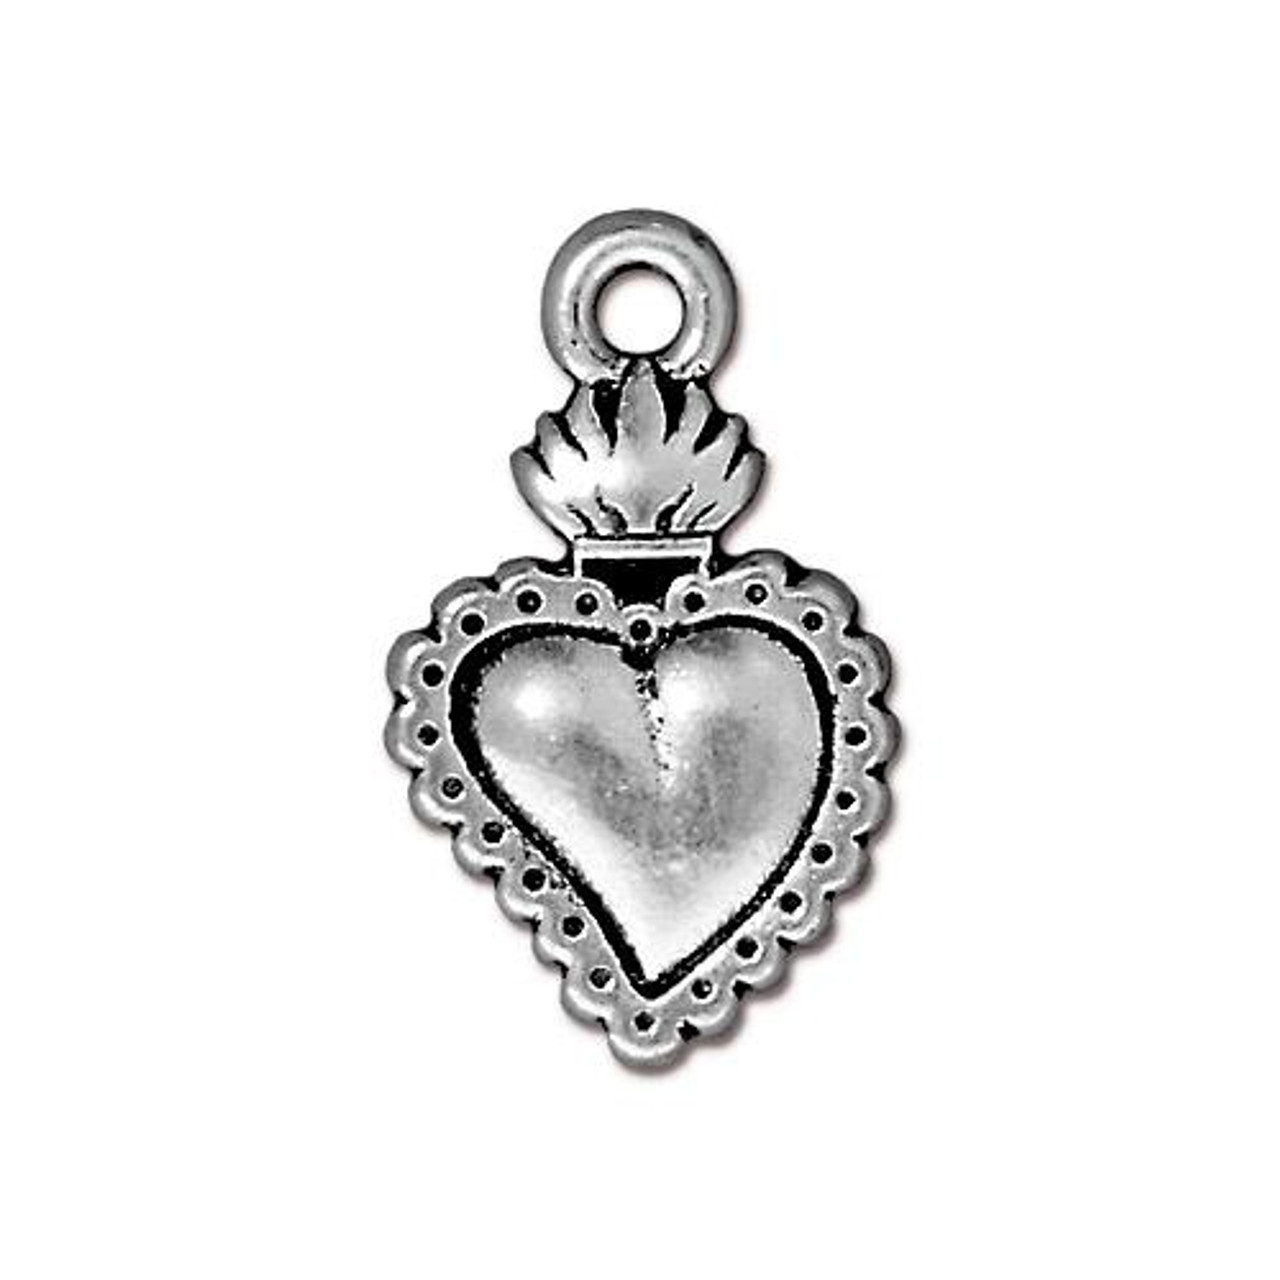 Milagro Heart Charm, Antiqued Silver Plate, 20 per Pack